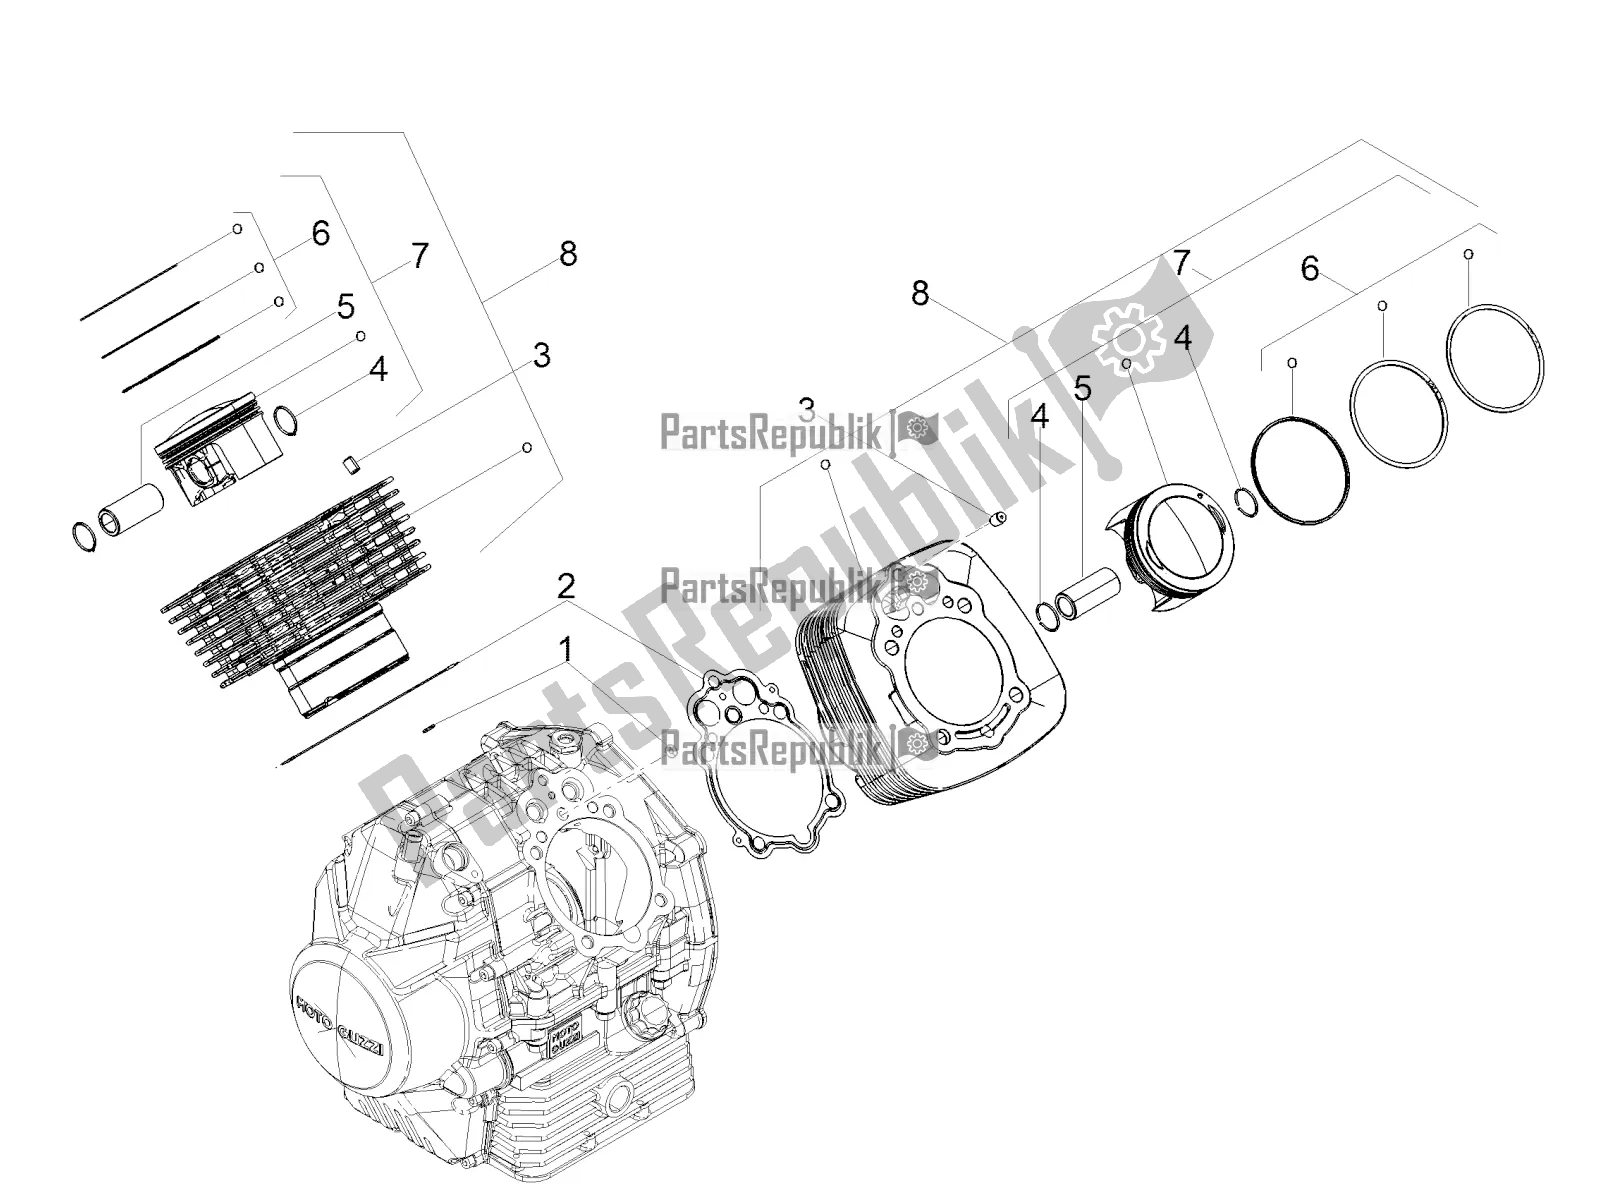 All parts for the Cylinder - Piston of the Moto-Guzzi V7 III Stone 750 ABS 2019